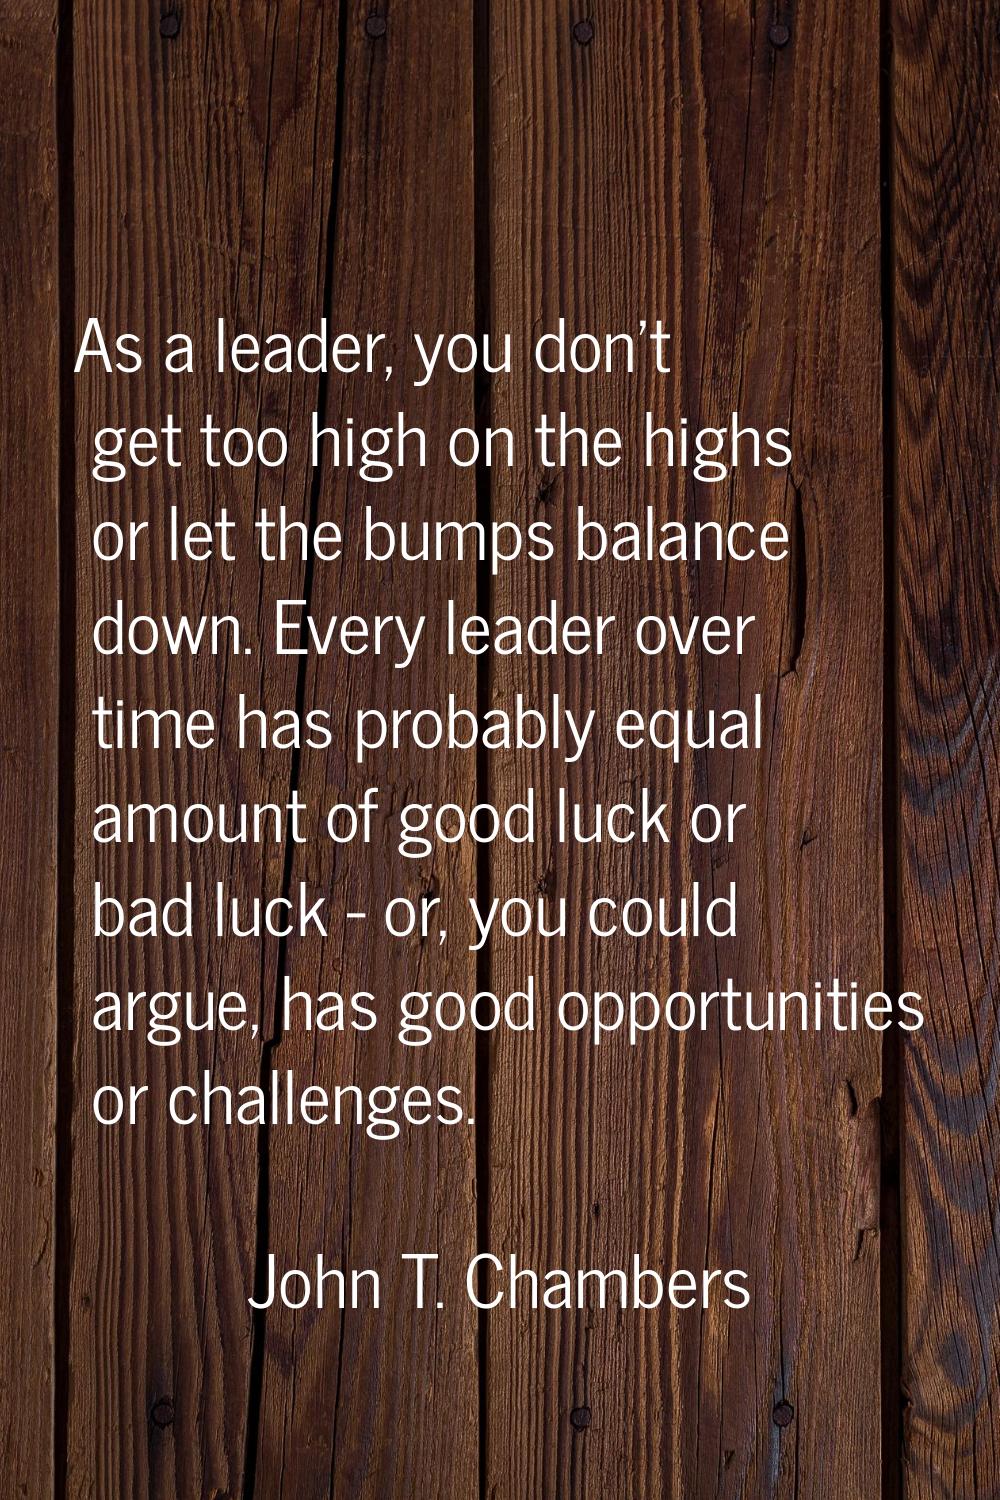 As a leader, you don't get too high on the highs or let the bumps balance down. Every leader over t